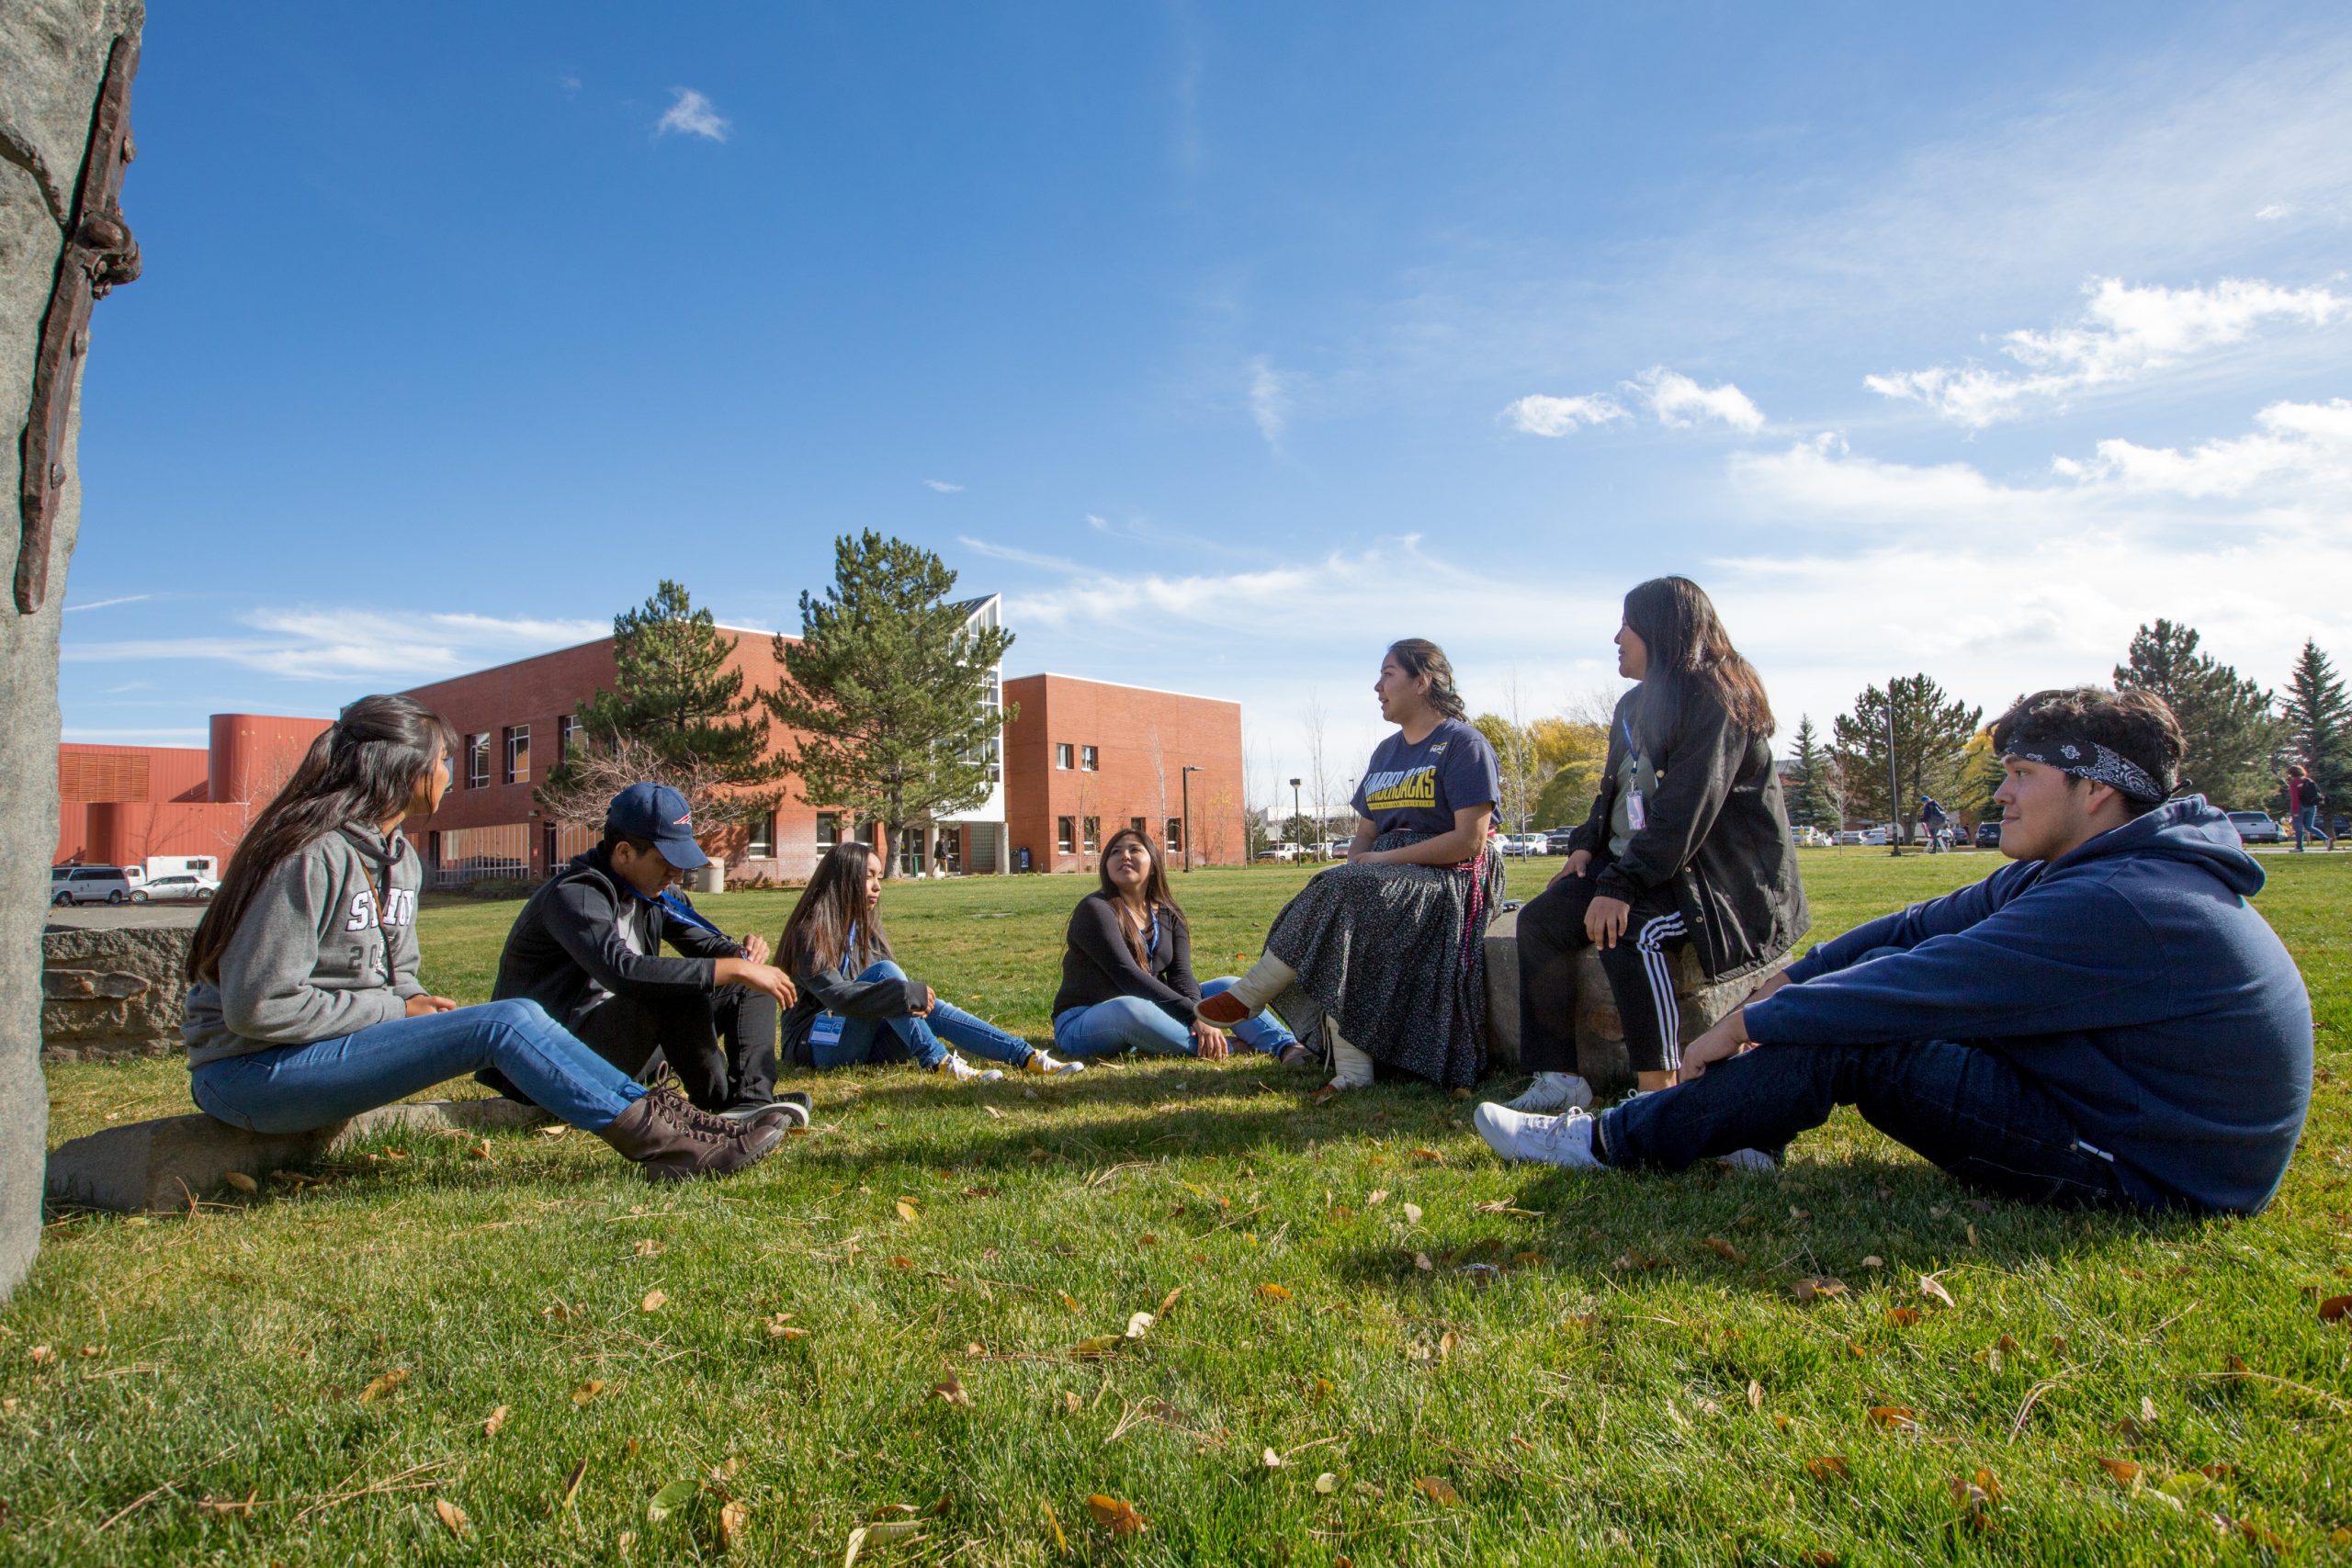 Students sit in a semicircle in the grass on the Flagstaff campus.